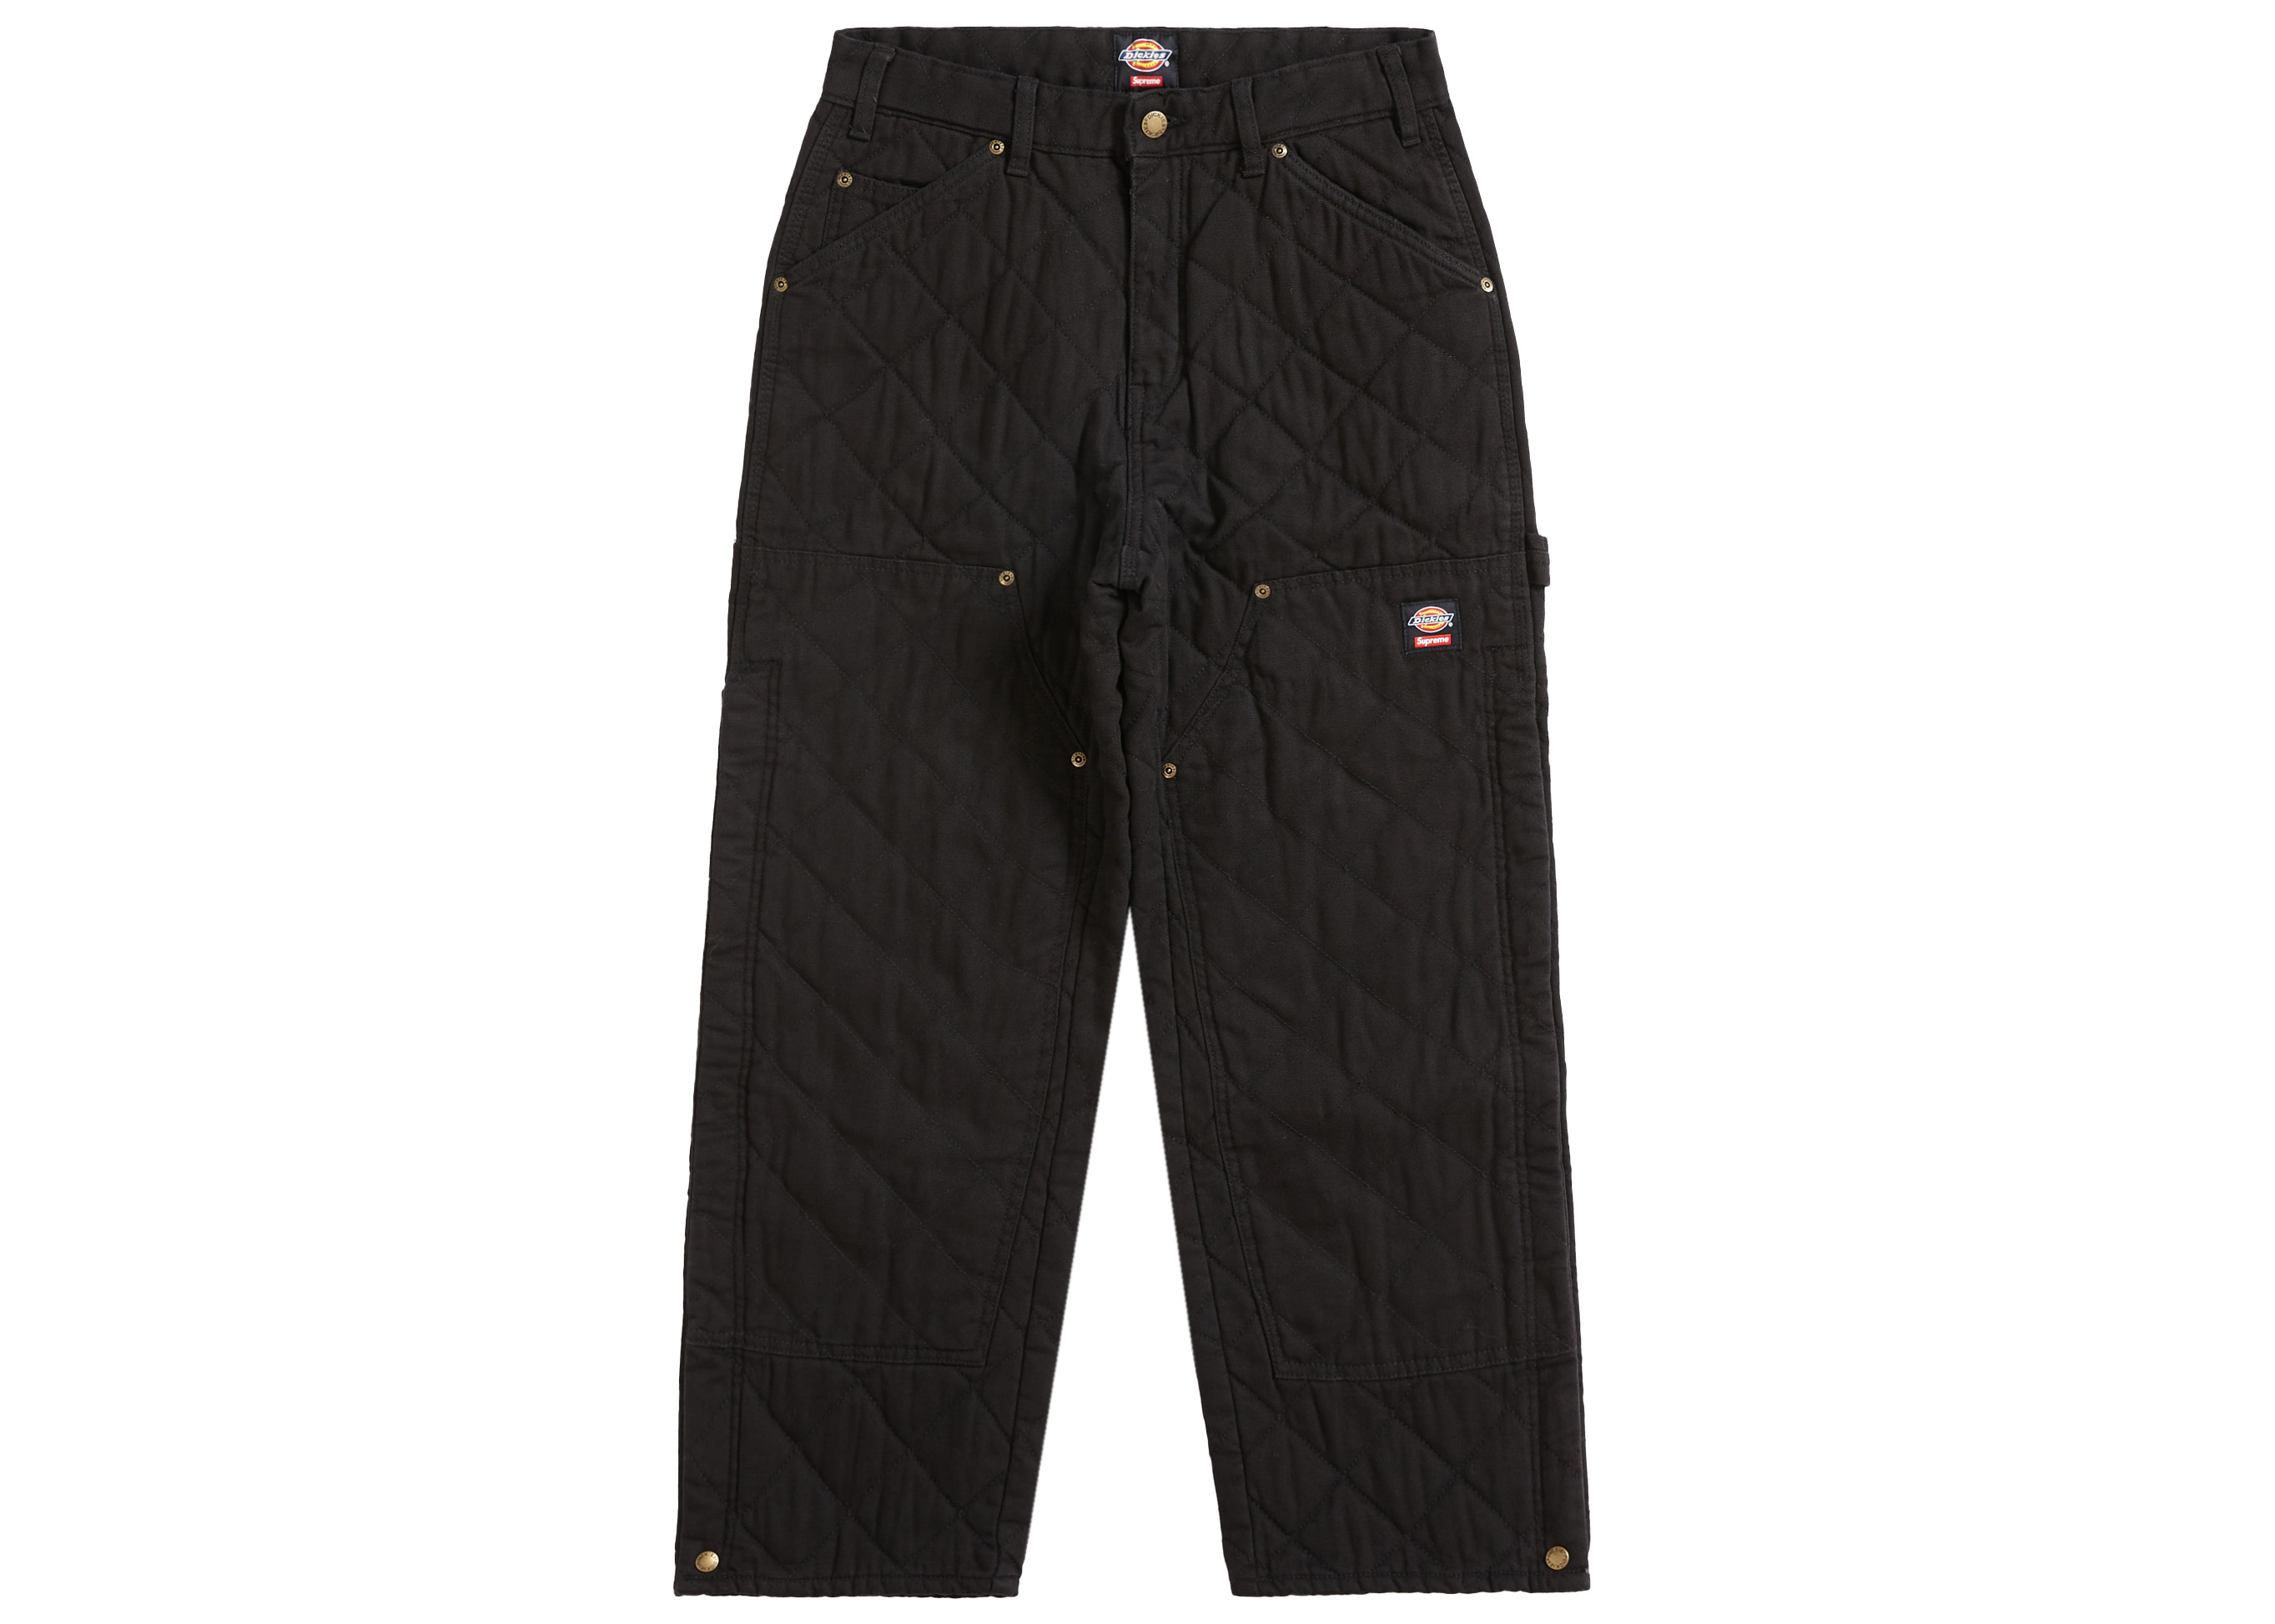 Supreme Dickies Quilted Double Knee Painter Pant Black Men's